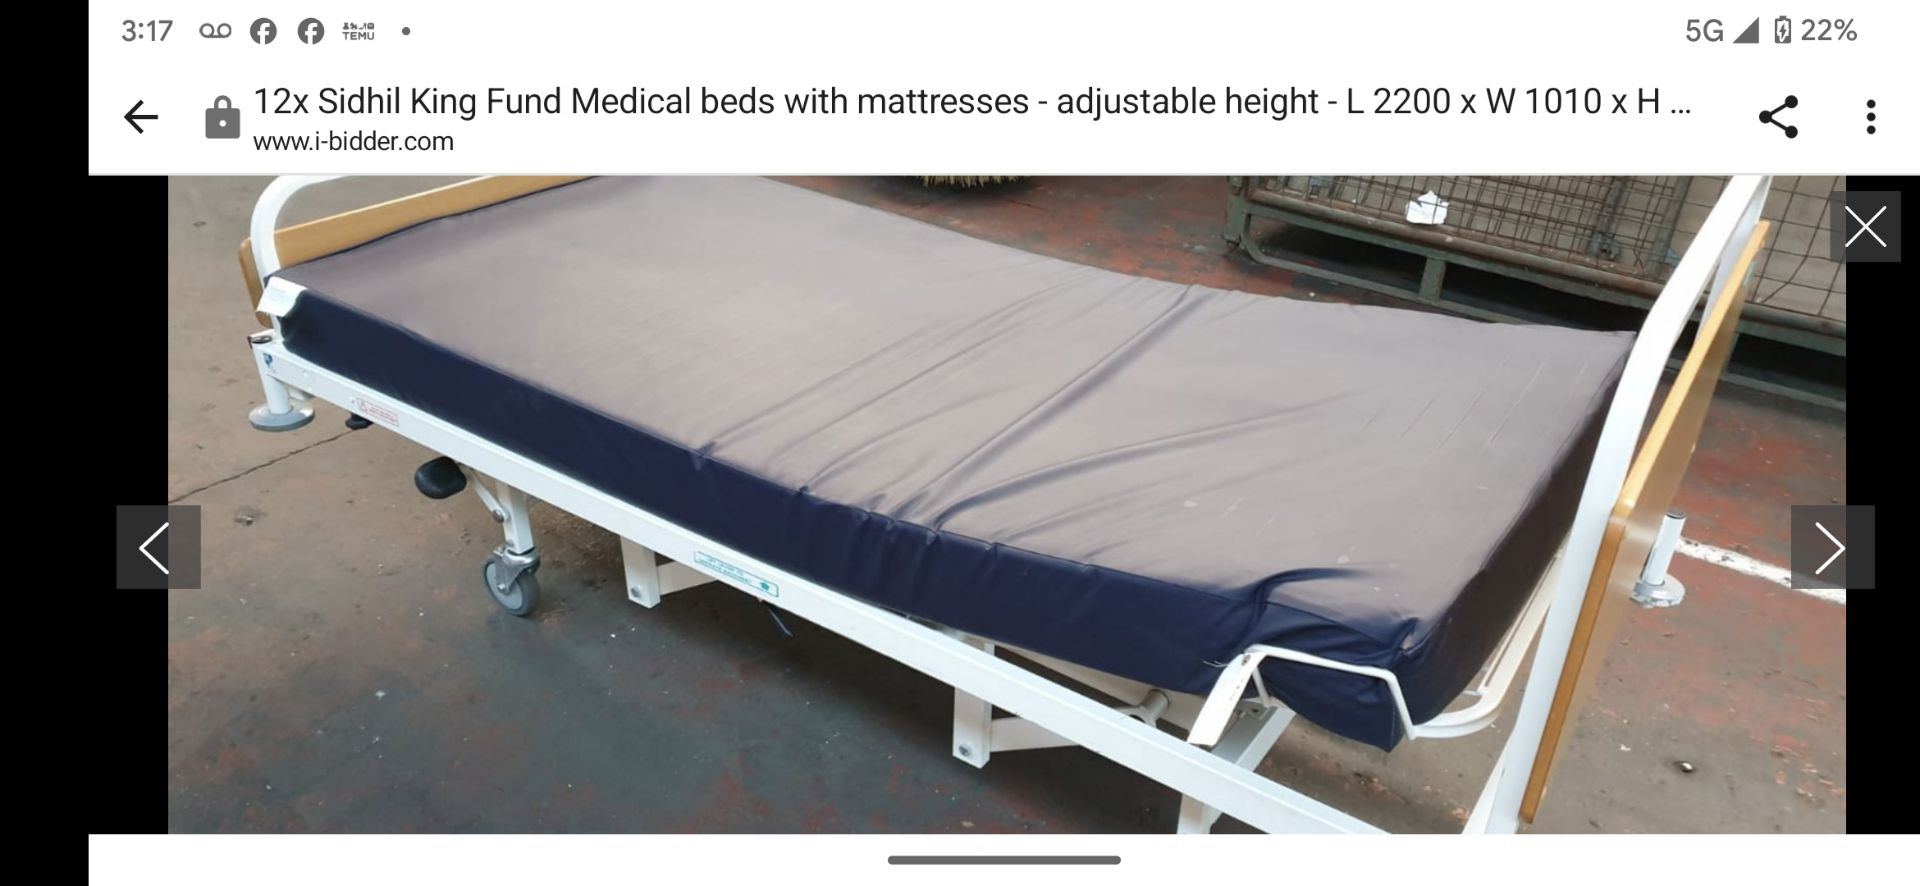 1 x Sidhil Kings Kund Hydraulic Hospital Bed With Mattress - Image 6 of 6